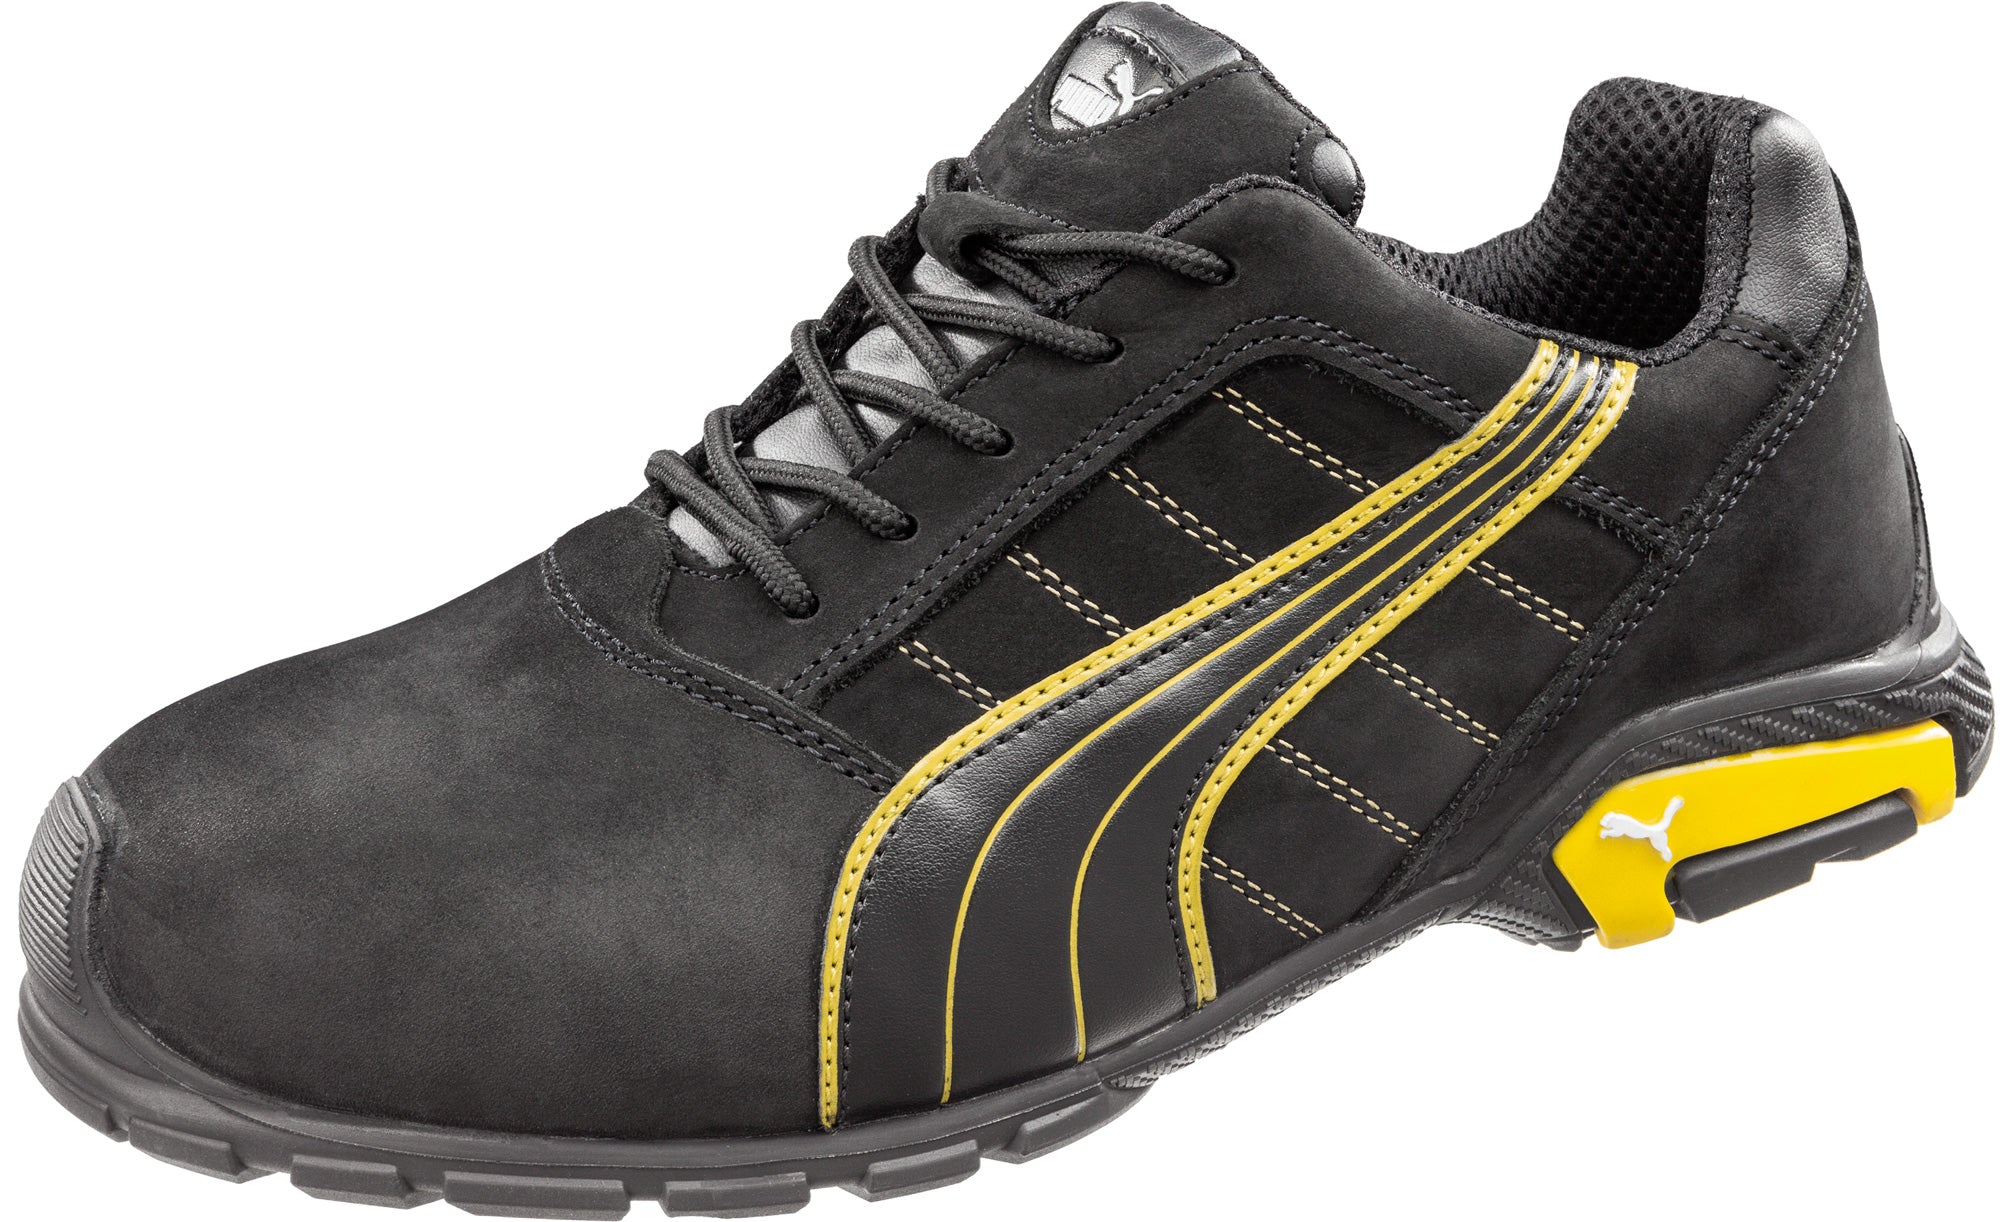 The Mens AT Leather – Puma Work Amsterdam Oxford Western Shoes Company Safety Black